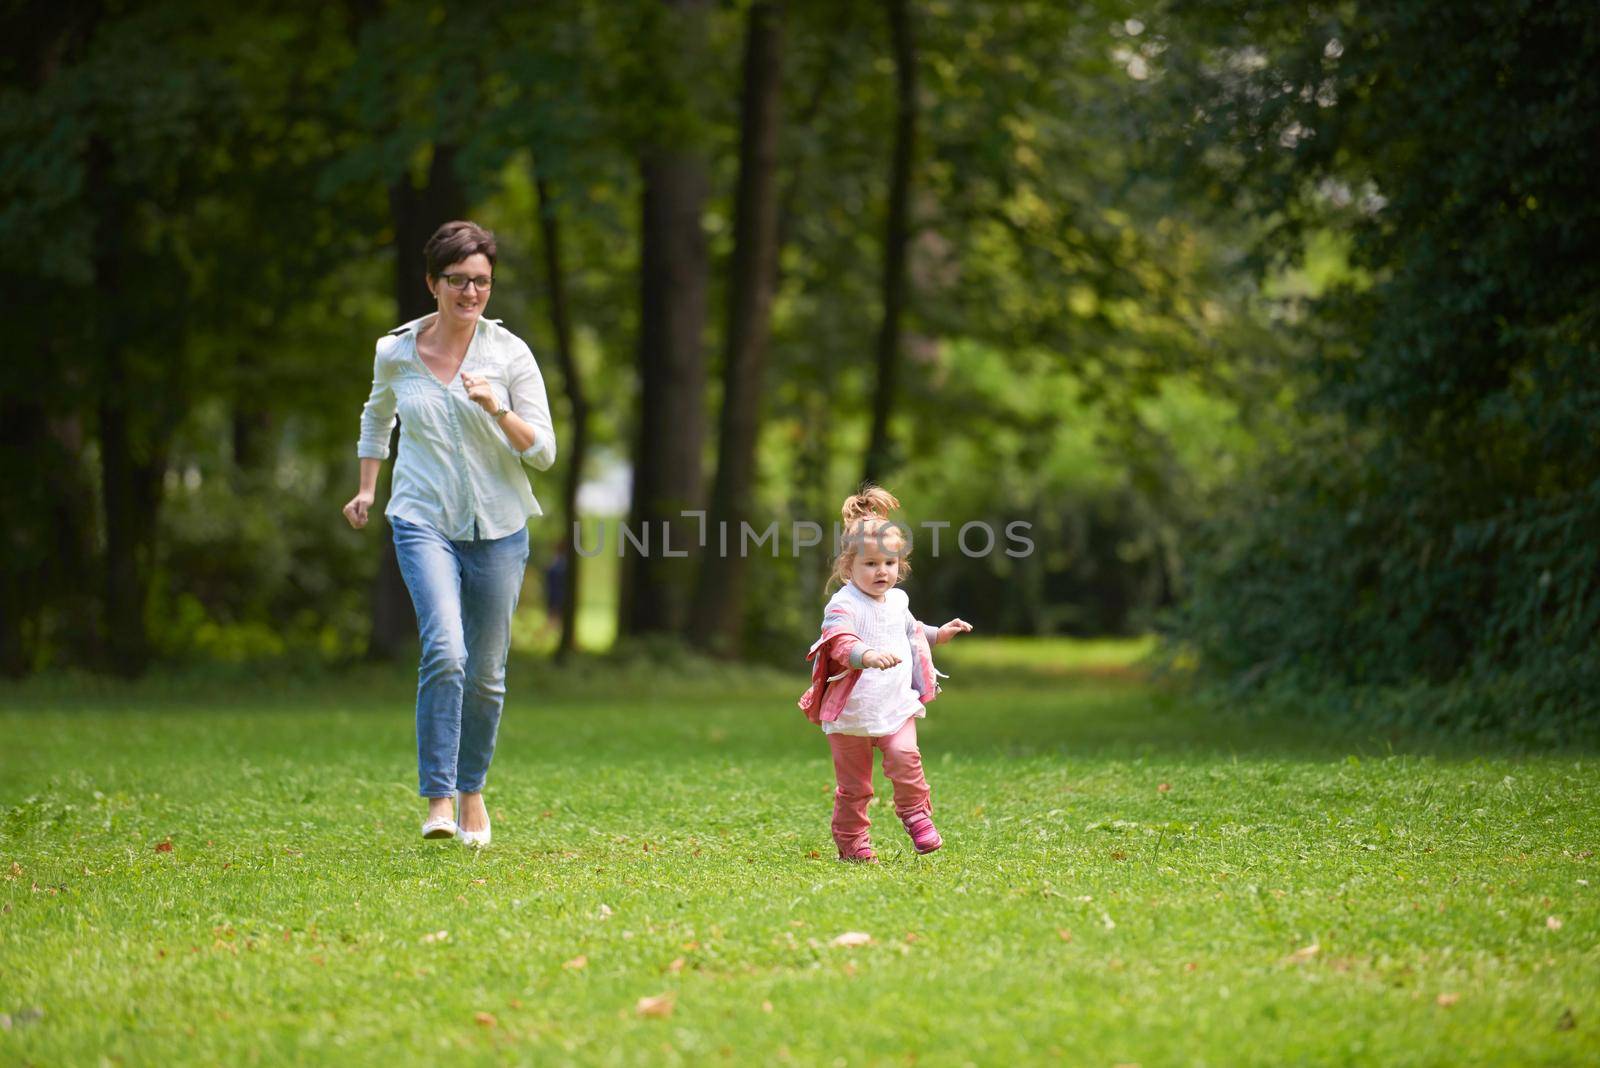 happy family playing together outdoor  in park mother with kids  running on grass